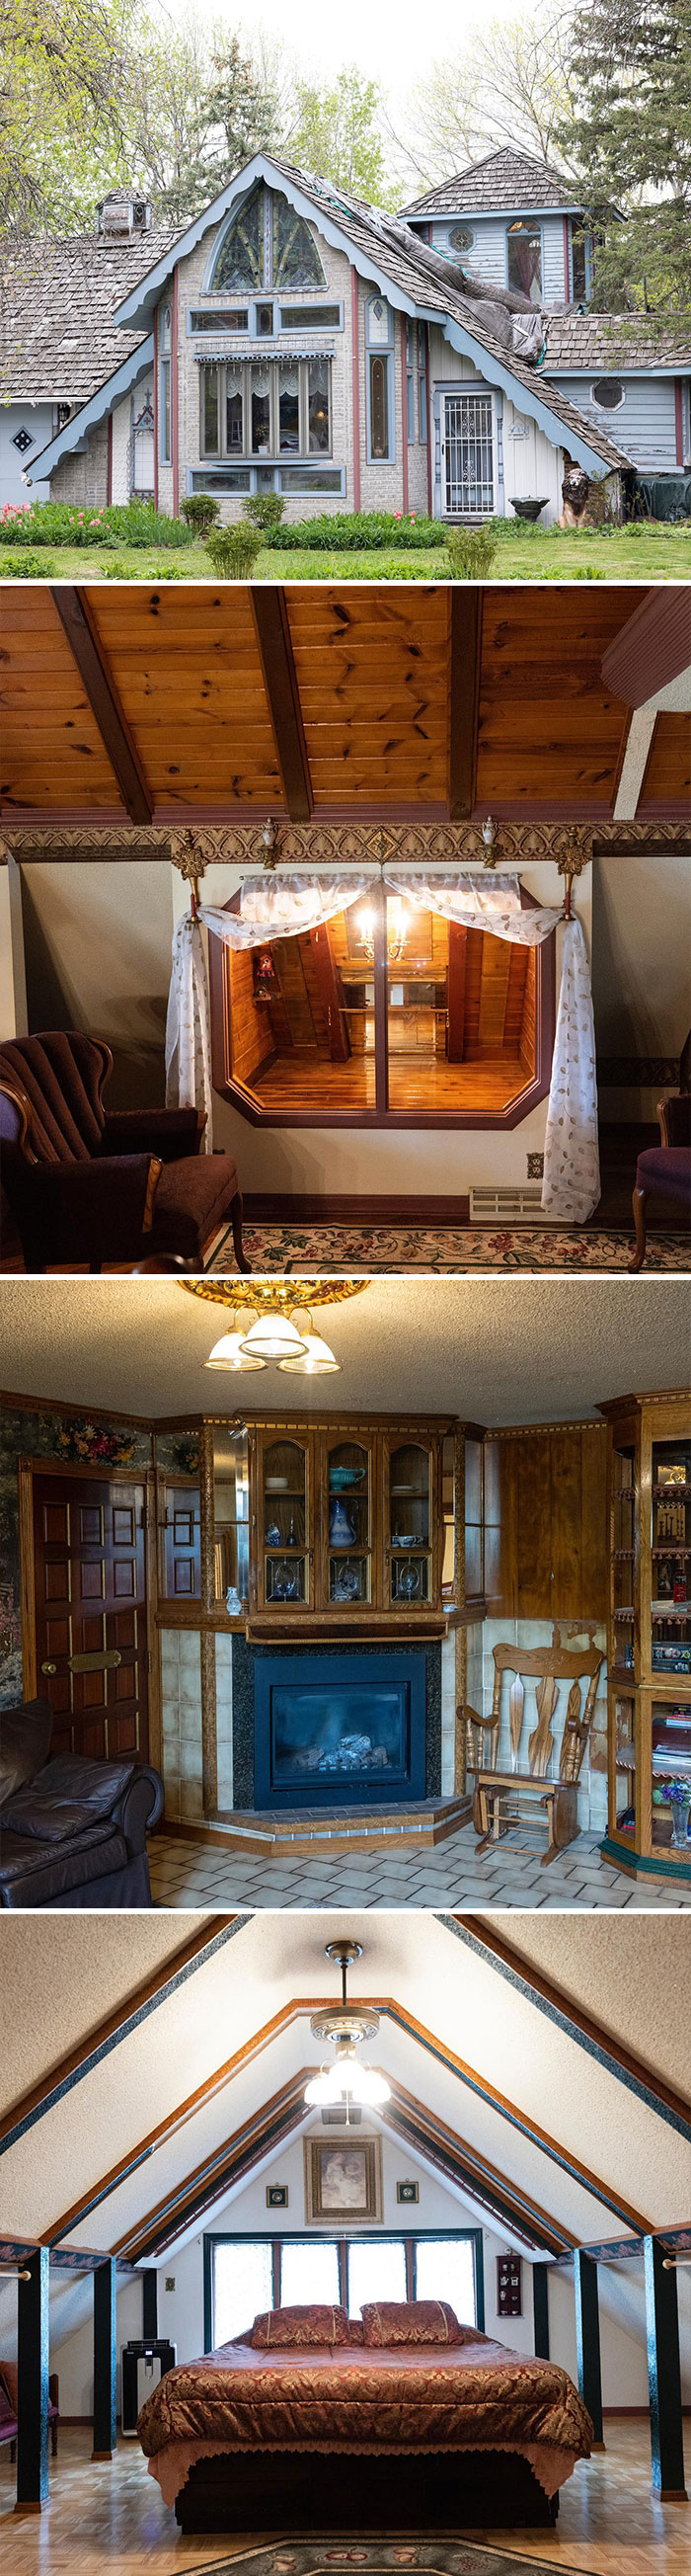 His Great Lakes Region, Mn Home Was Built In 1964 By A Woodworker But They Didn’t Construct It Correctly So Many Of The Doors Don’t Open Lol. Notice The Glitter Popcorn Ceilings Throughout. Ps The Statue Lion In The Front Weighs Over 150 Pounds